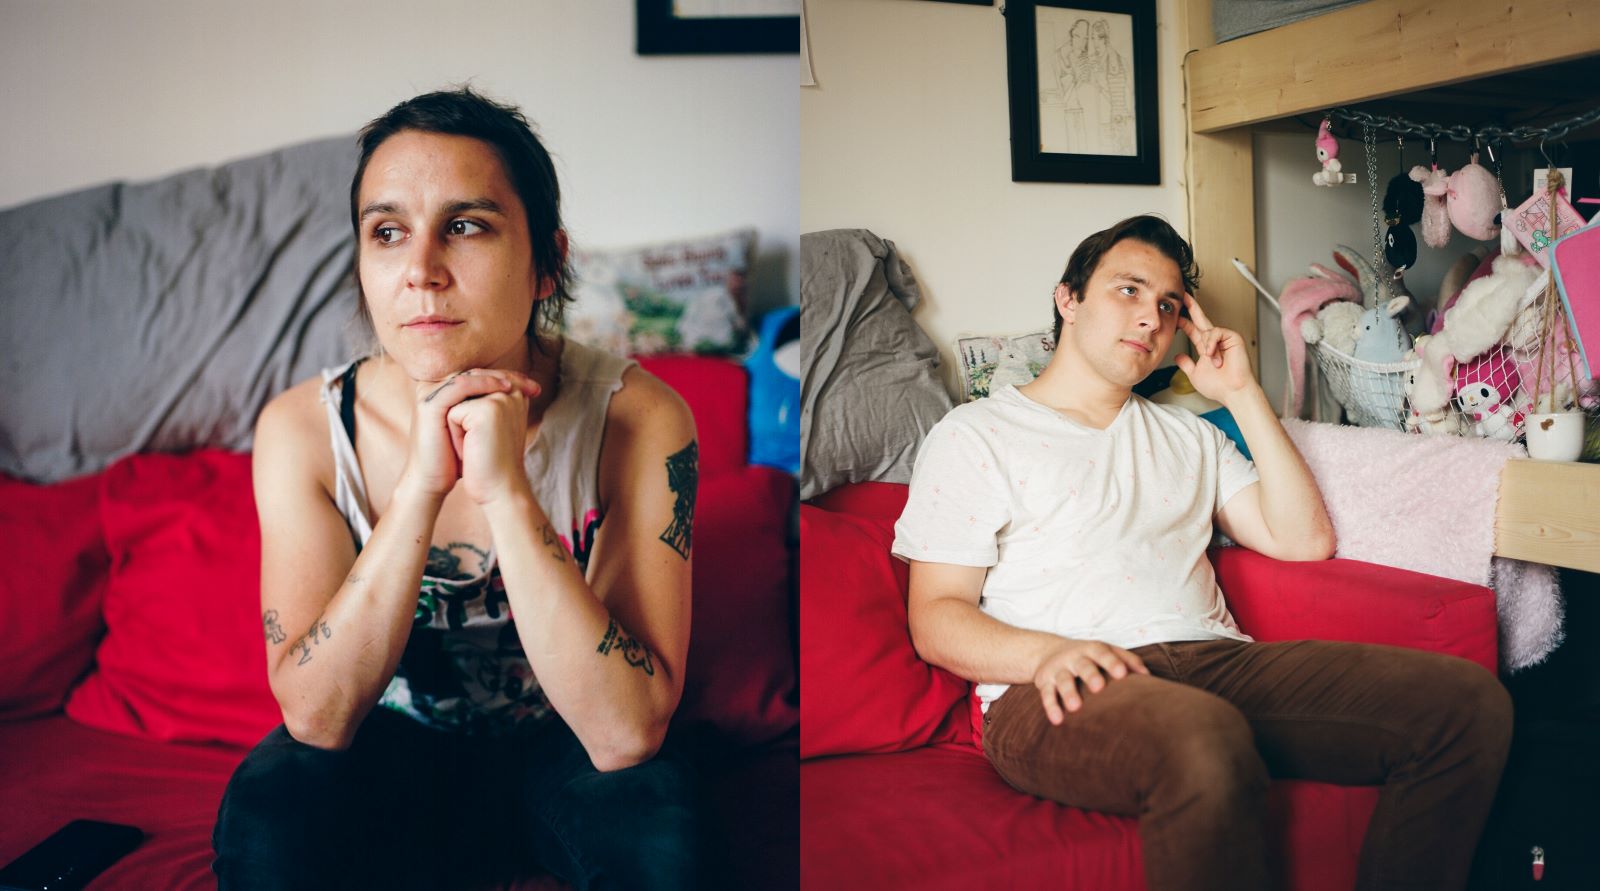 Left: Eris Nyx, a light-skinned woman dressed in black jeans and a home-cut tank top, sits on a red couch with her chin resting on her hands. Right: Jeremy Kalicum, a light-skinned man, sits on a red couch, looking off-camera. A webbed hammock full of stuffed animals is visible behind him.